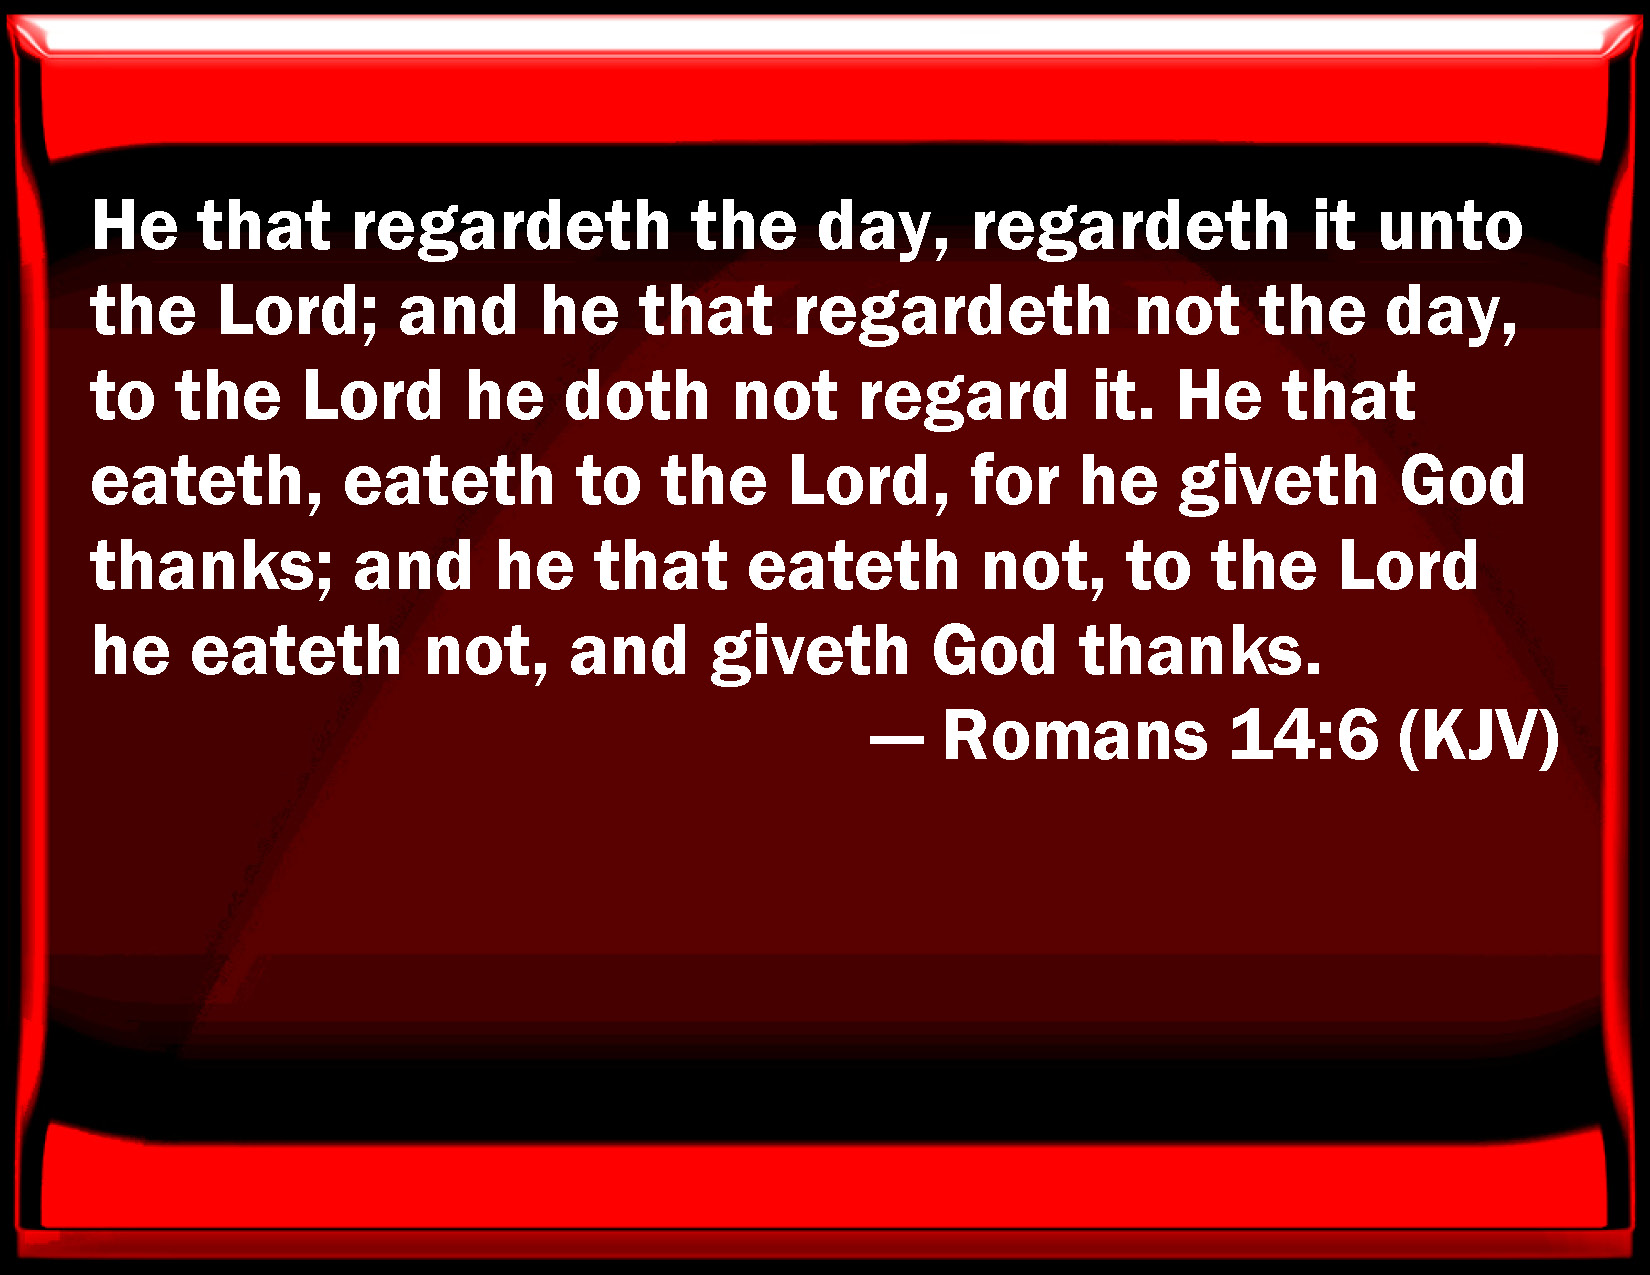 romans-14-6-he-that-regards-the-day-regards-it-to-the-lord-and-he